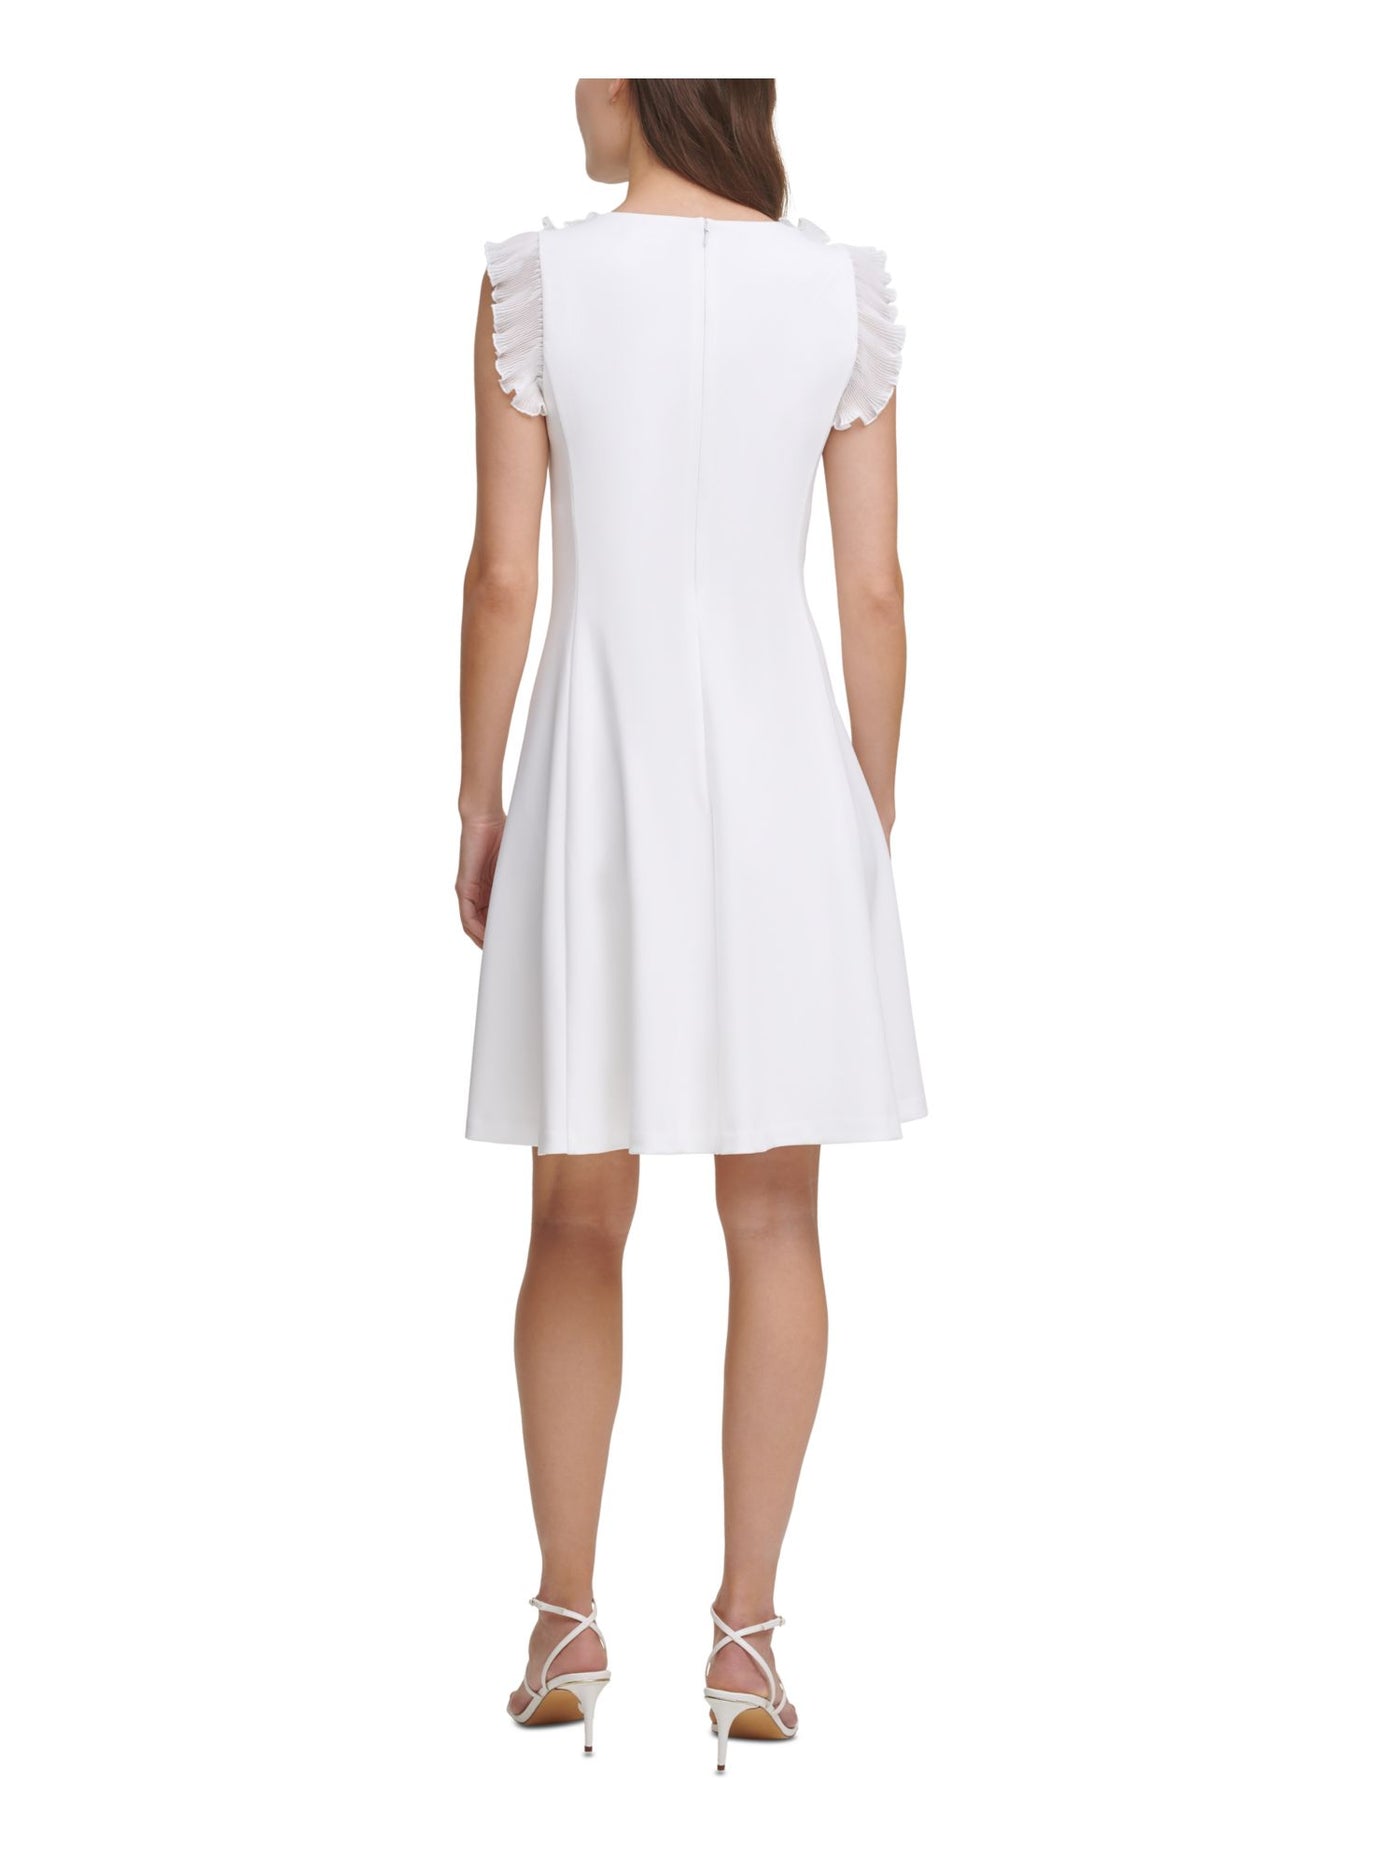 DKNY Womens White Zippered Pleated Scuba Crepe Ruffles Lined Cap Sleeve Crew Neck Above The Knee Wear To Work Fit + Flare Dress 16